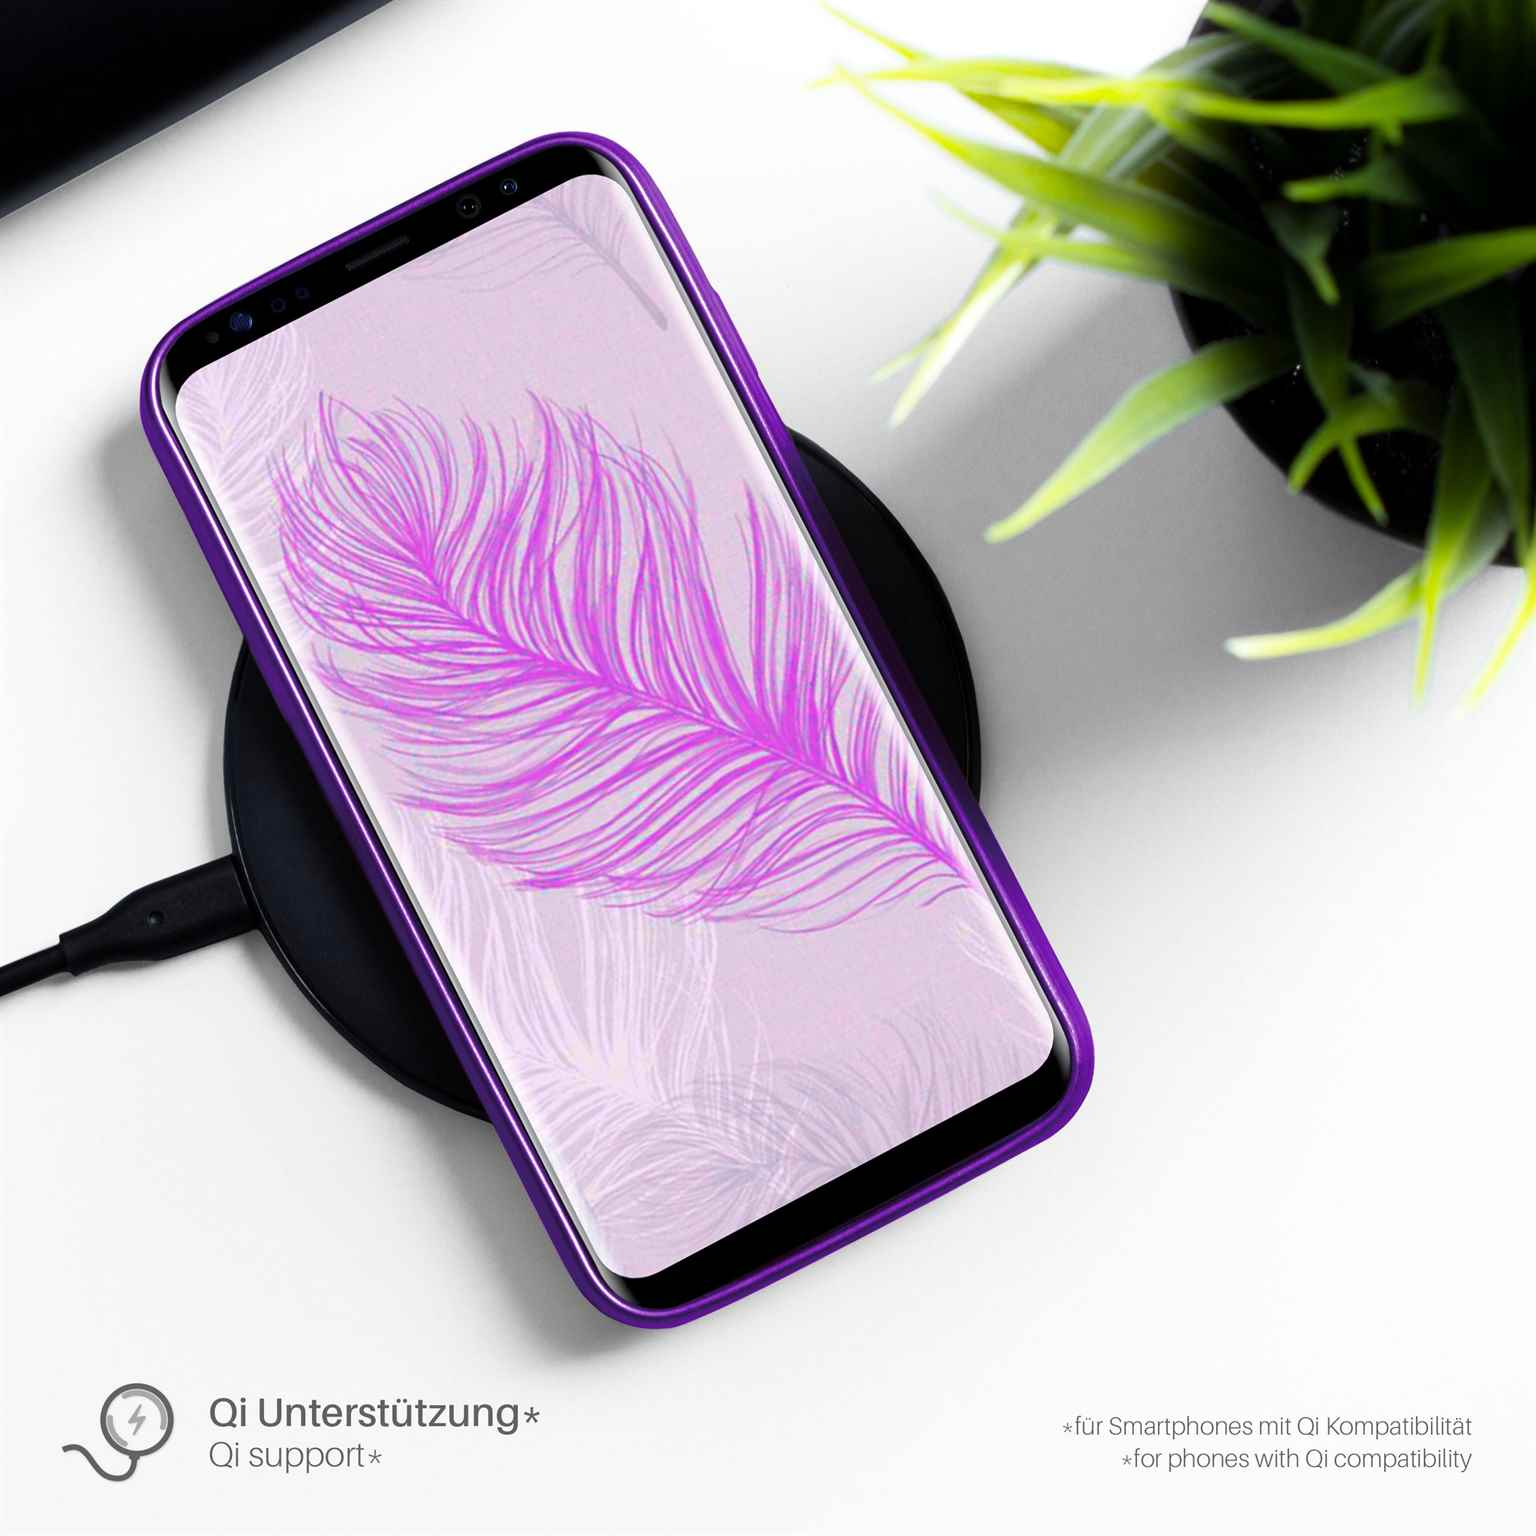 Purpure-Purple MOEX Brushed Apple, Case, Backcover, iPhone 6s,